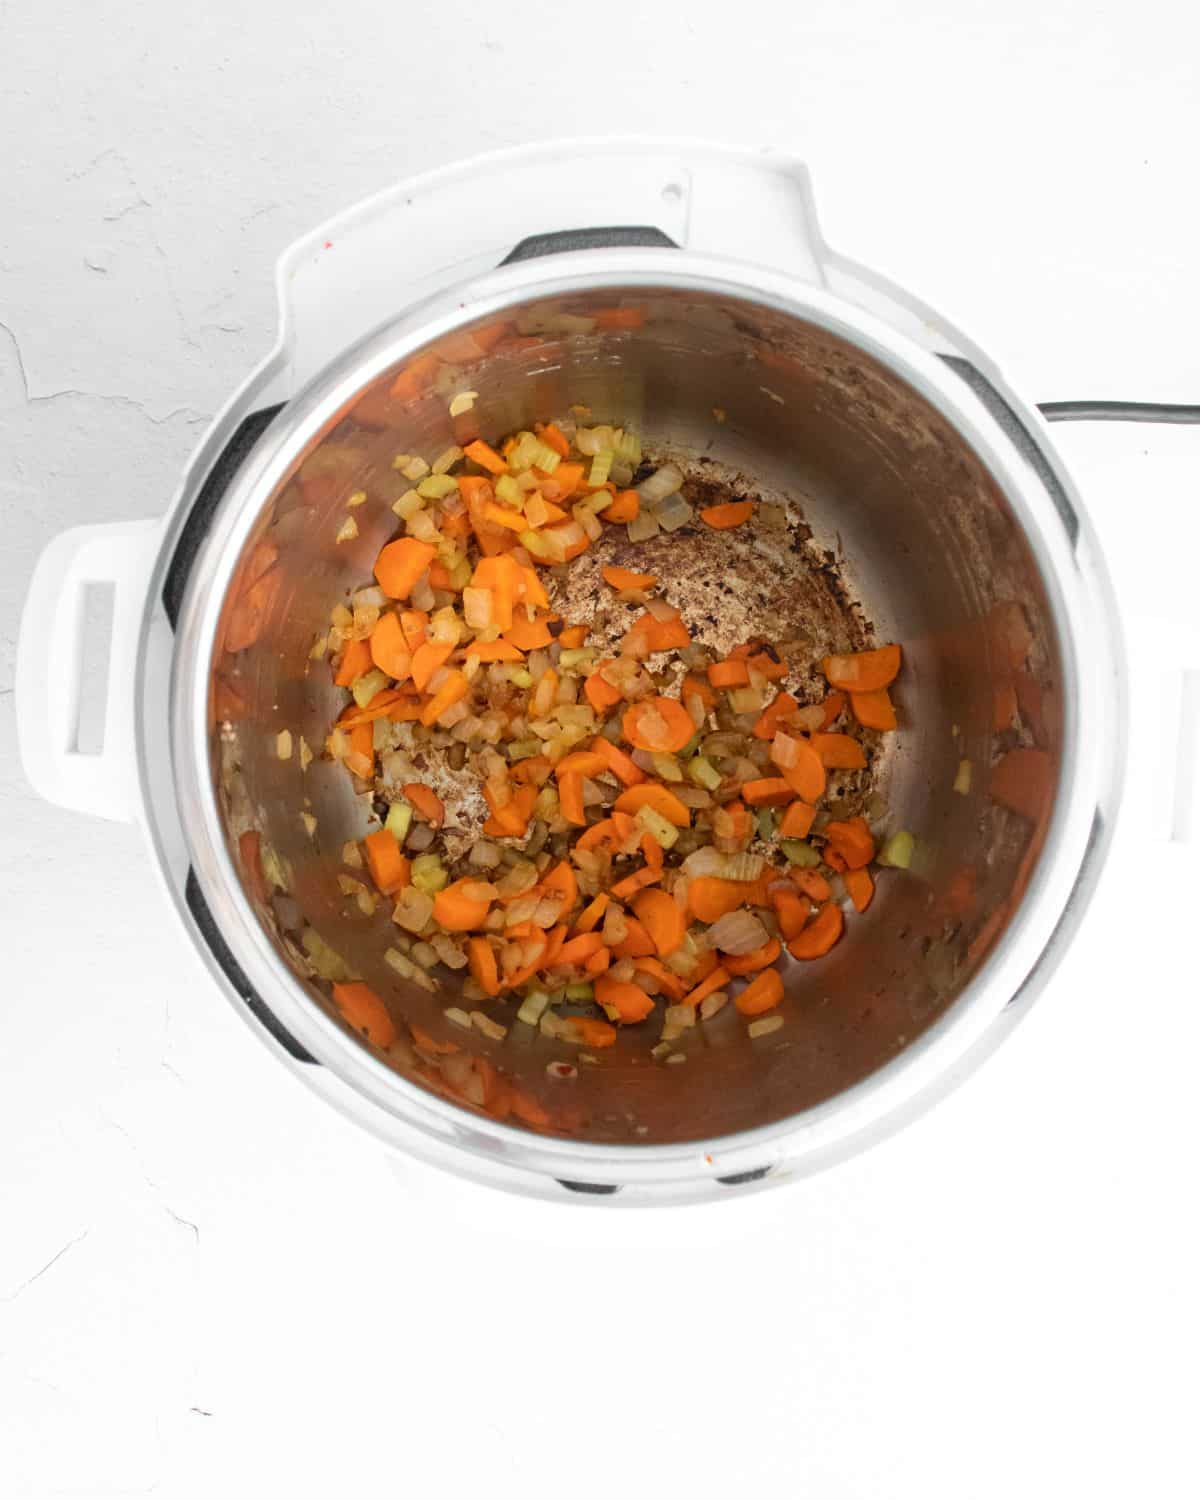 Garlic, onion, celery, and carrots are being sautéed in the Instant Pot.